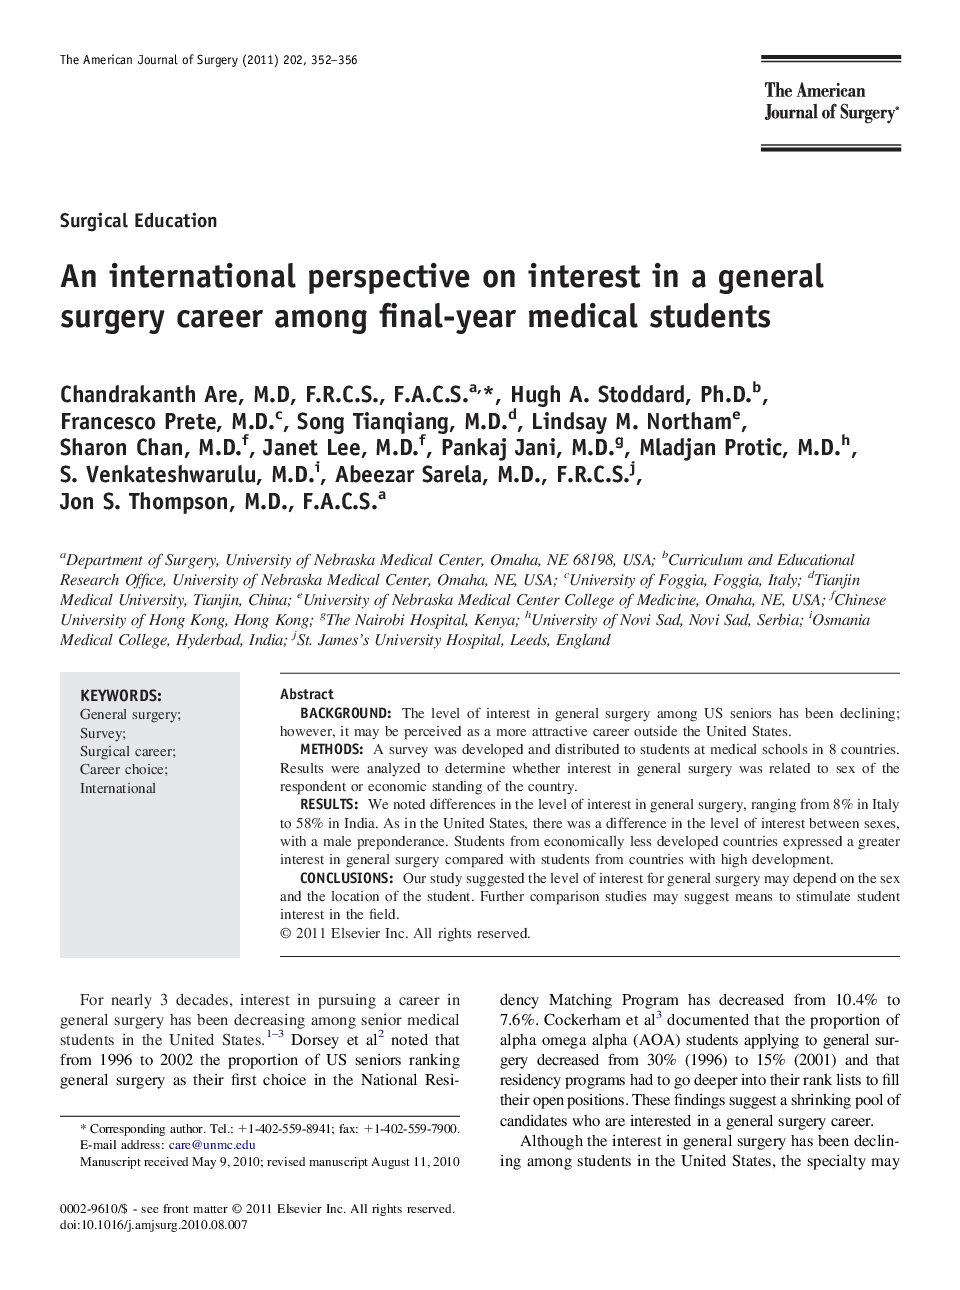 An international perspective on interest in a general surgery career among final-year medical students